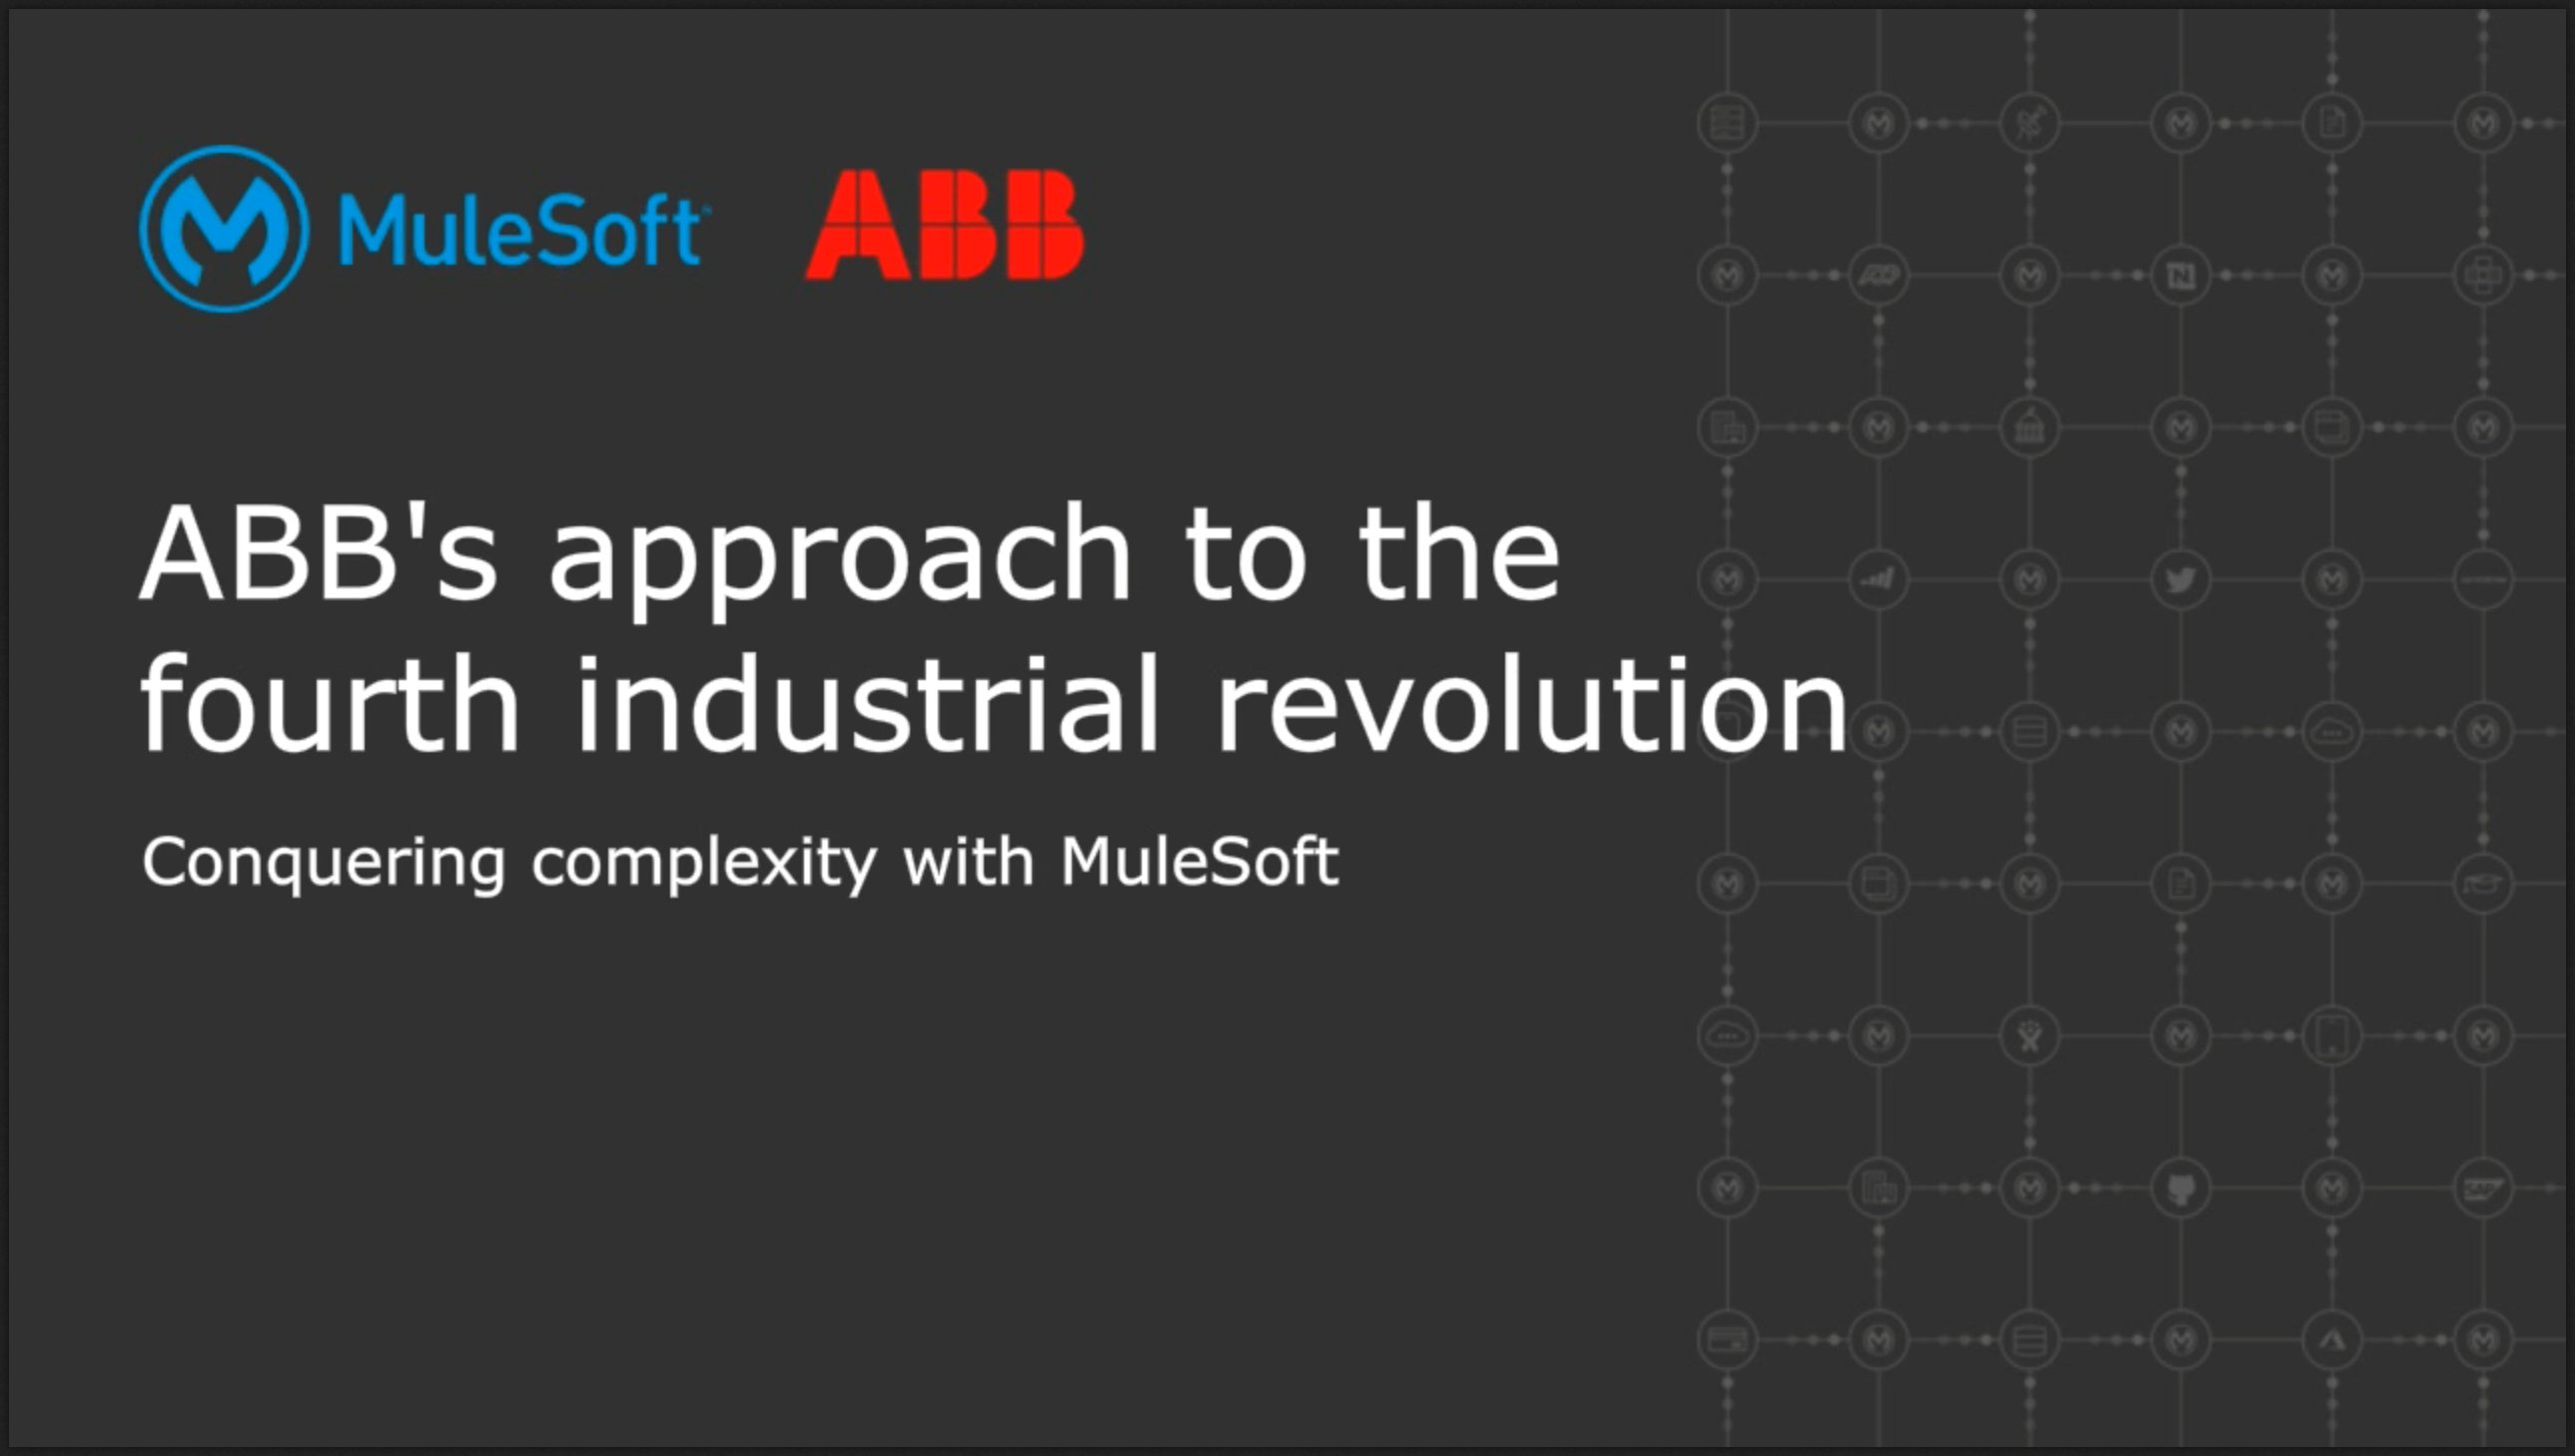 ABBs approach to the fourth industrial revolution